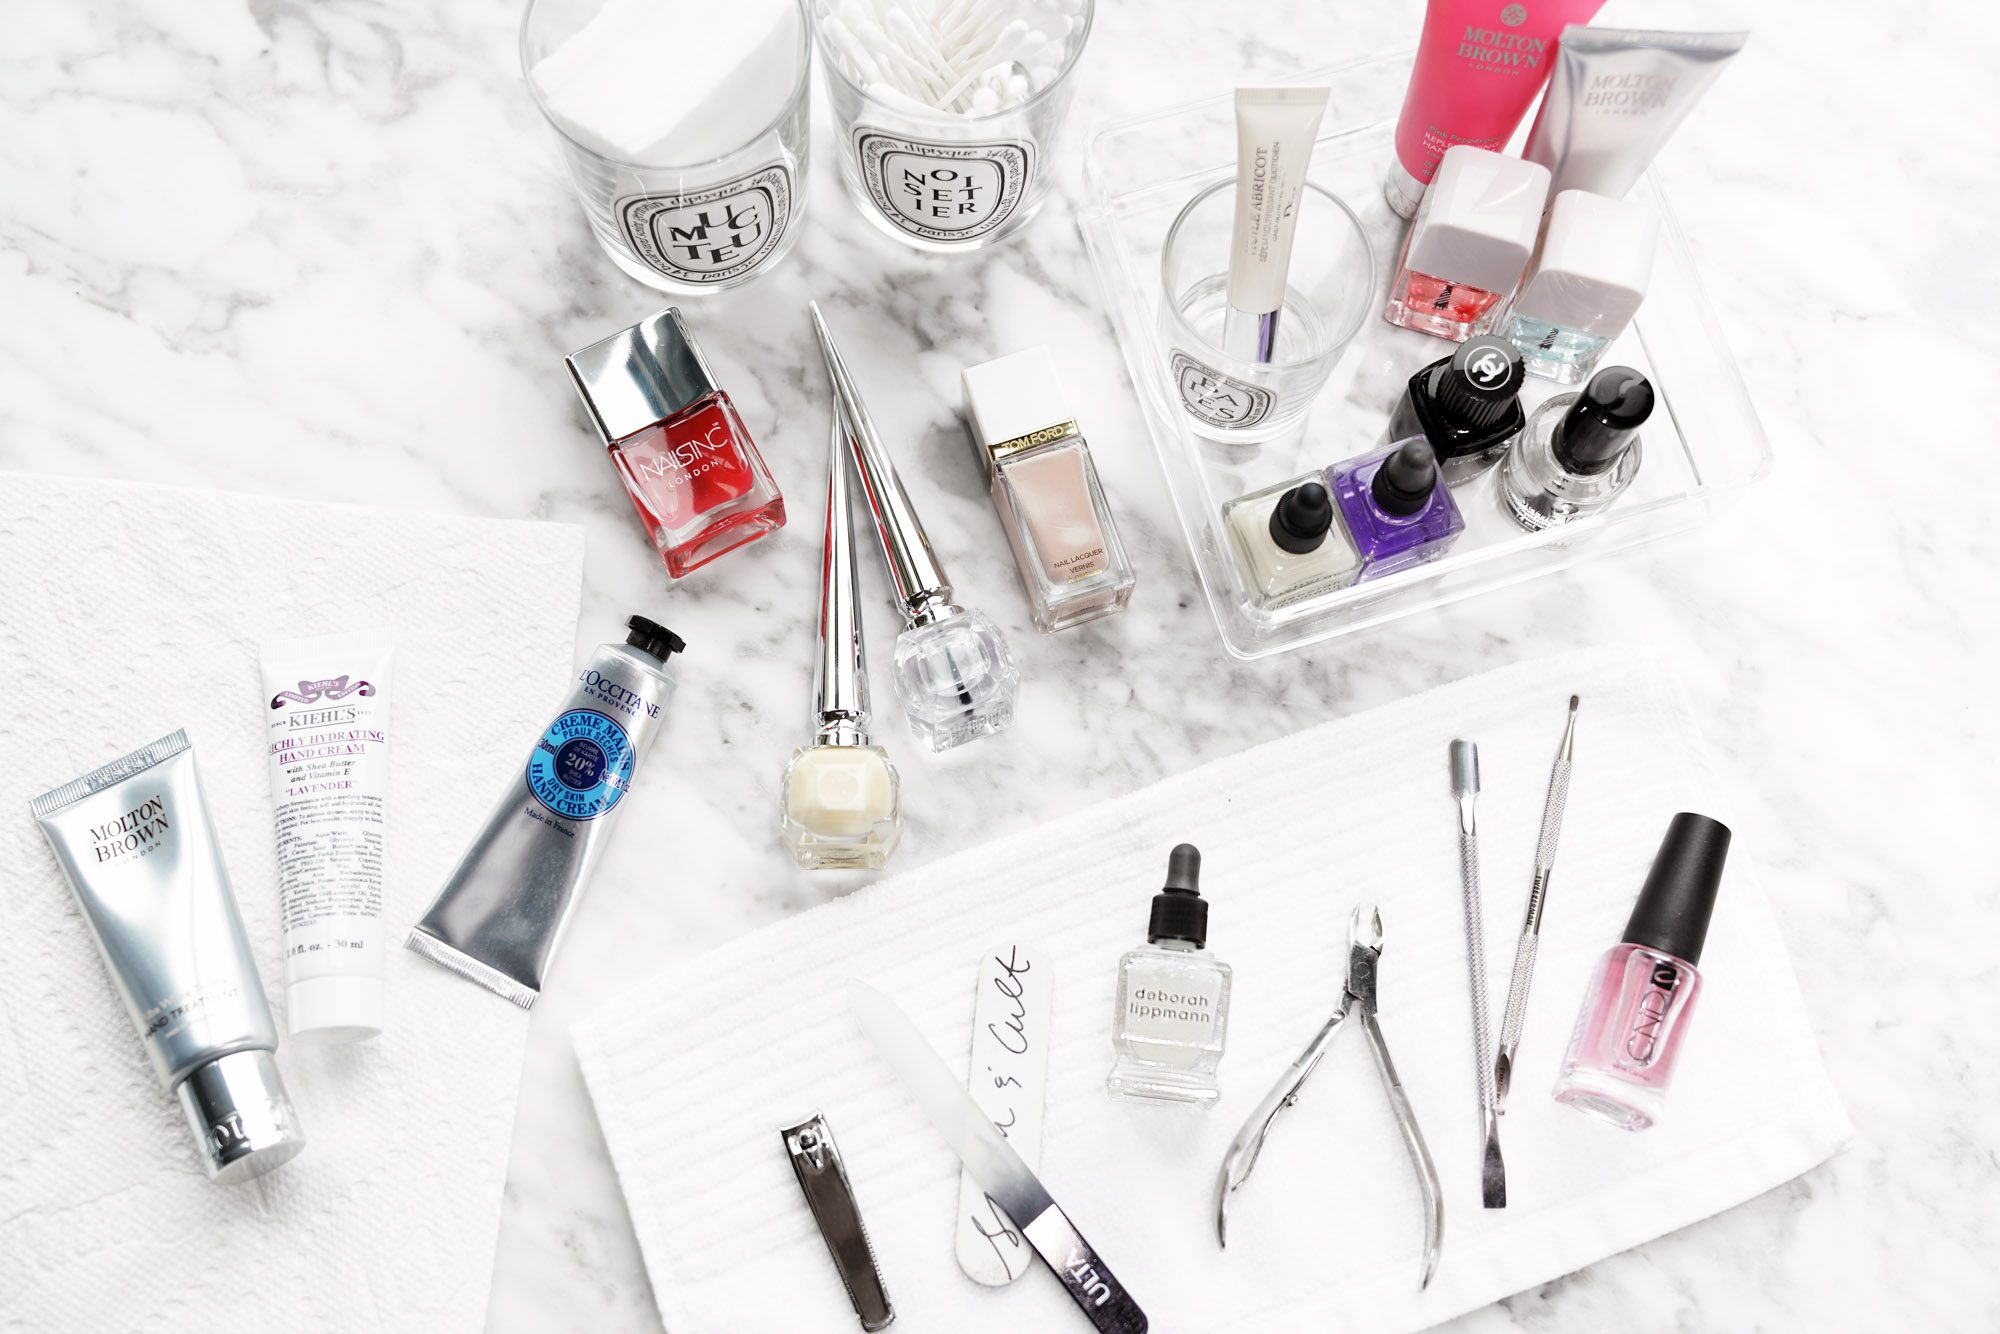 Best Hand and Nail Care Essentials for a DIY Manicure